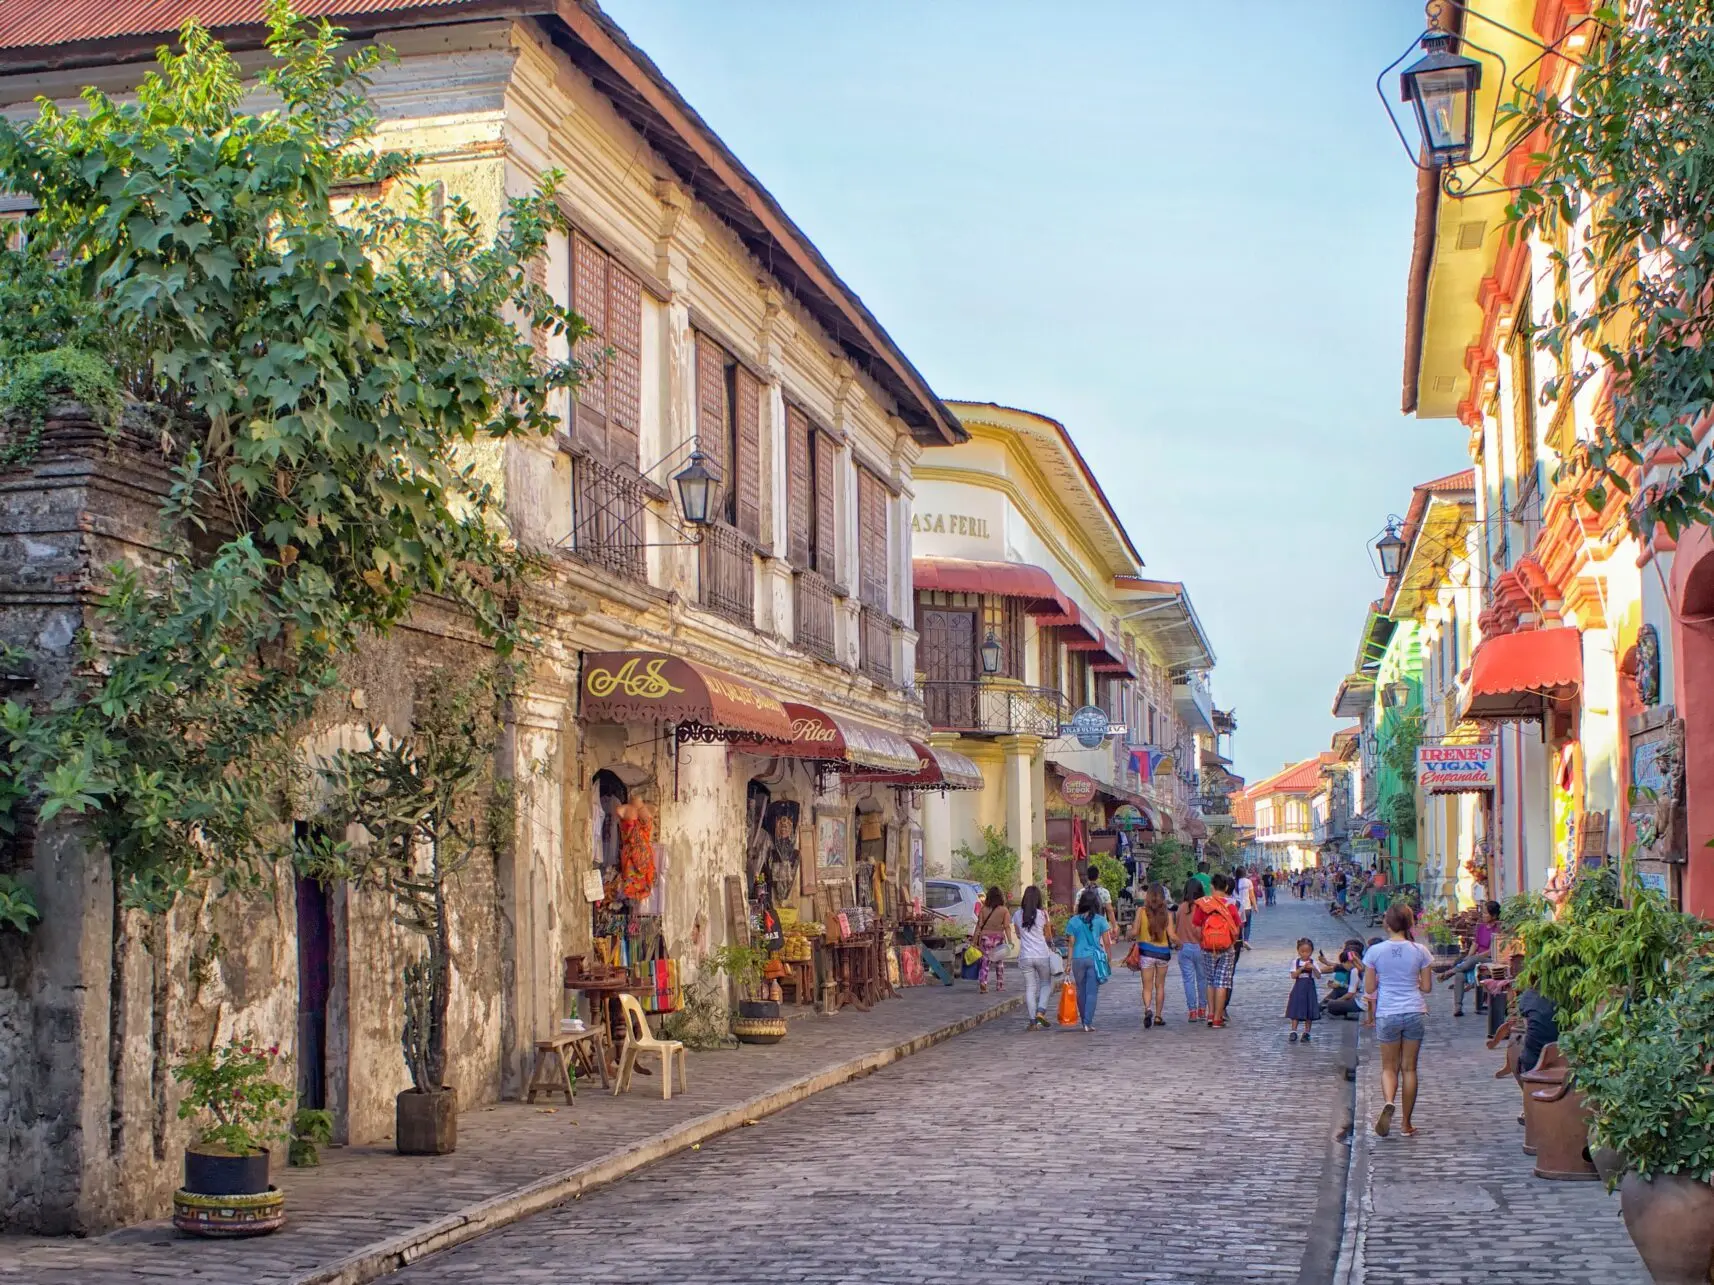 Vigan is the capital of the Province of Ilocos Sur